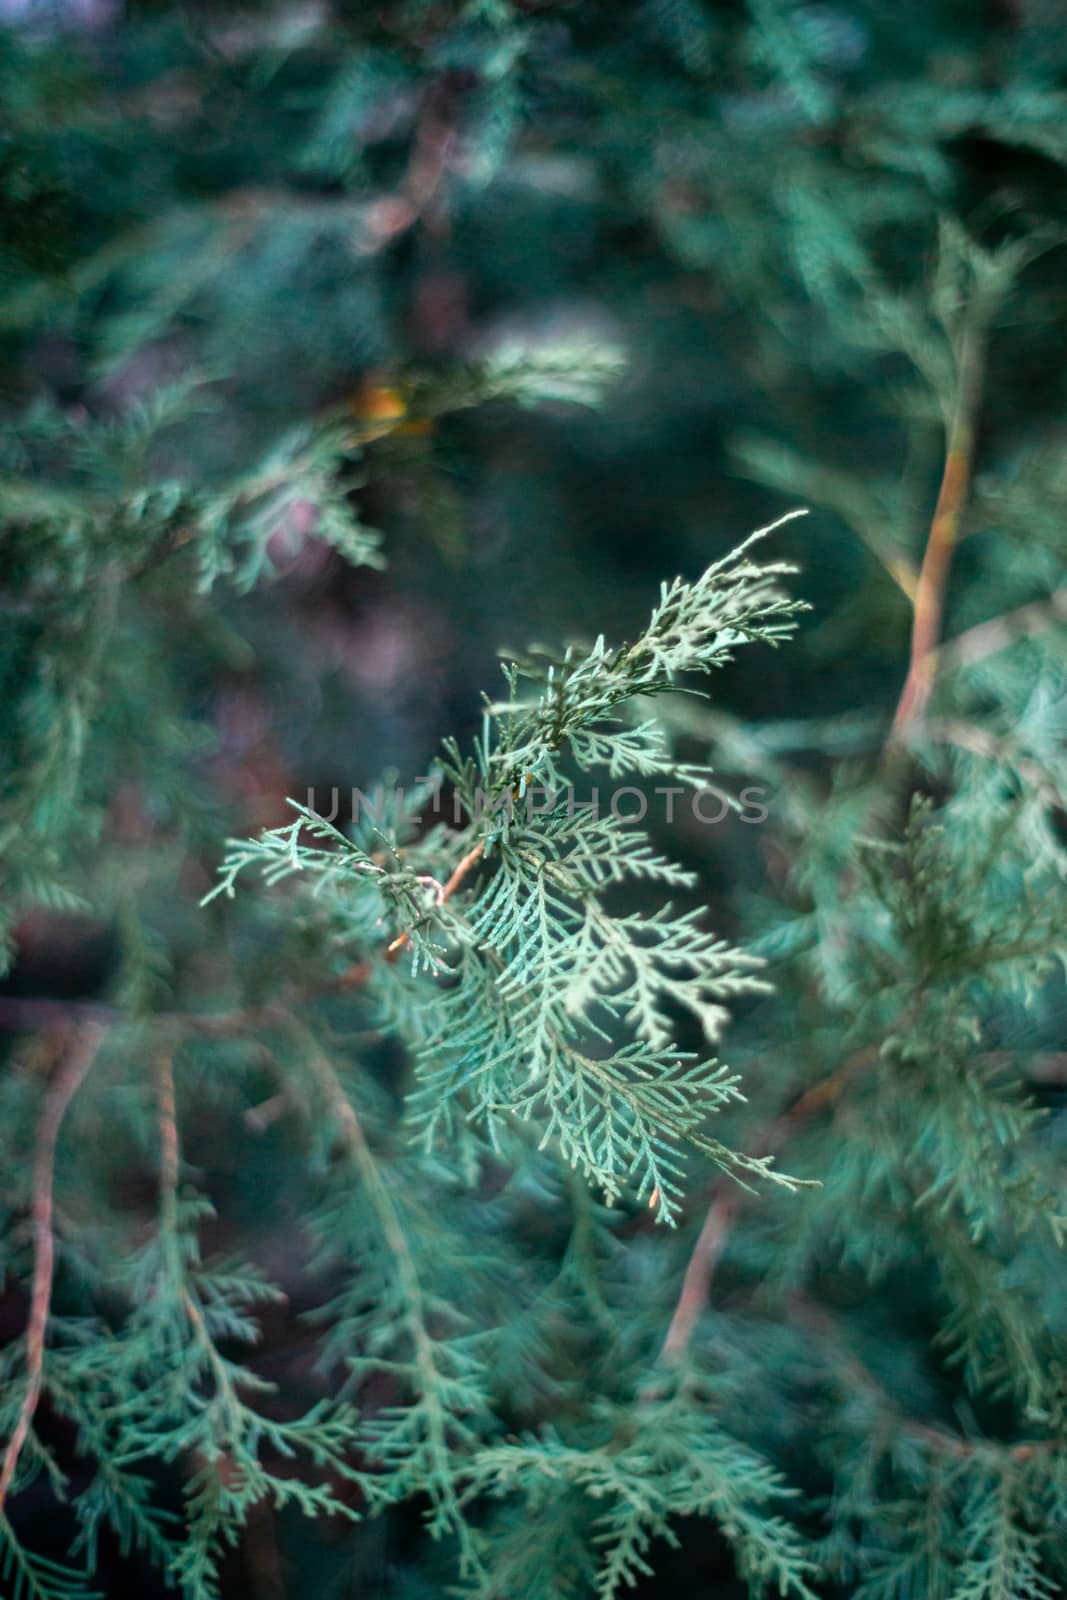 The thuja leaves in close-up view. Late fall, first snow. Good texture and pattern. Dark green colours, low light photo.